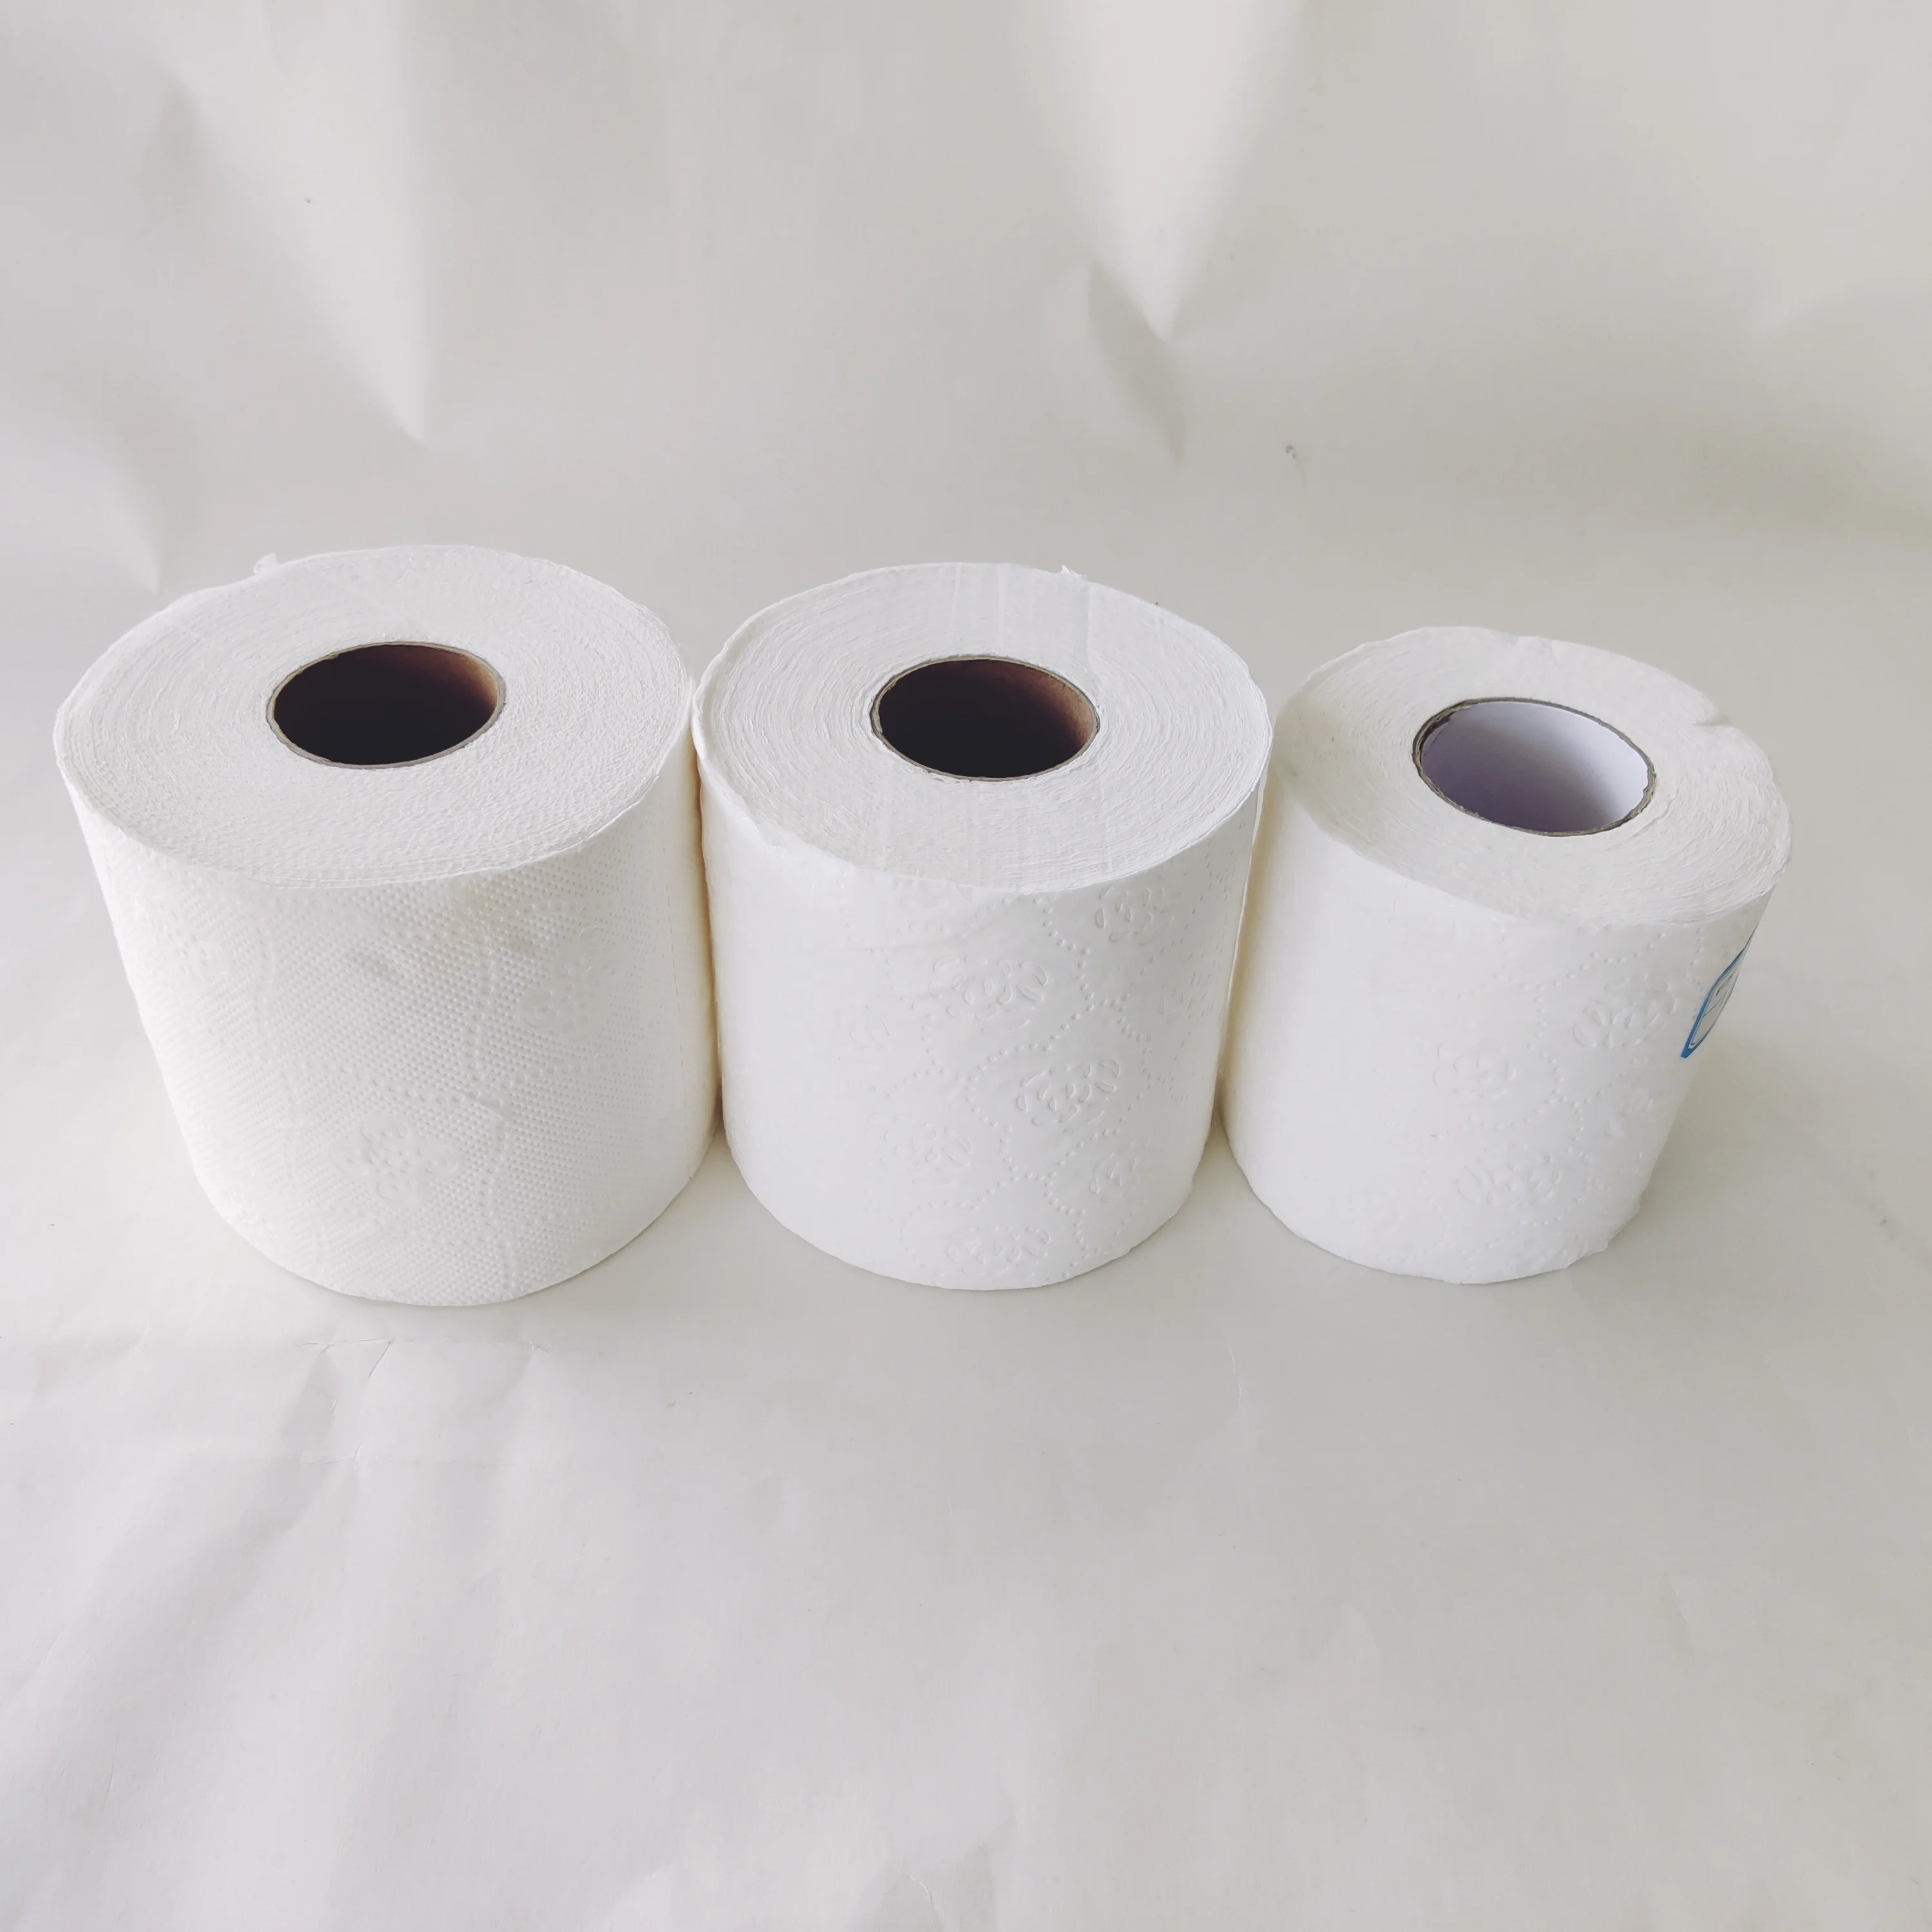 Toilet paper tissue paper bamboo toilet paper toilet roll 48 rolls in clear polybag